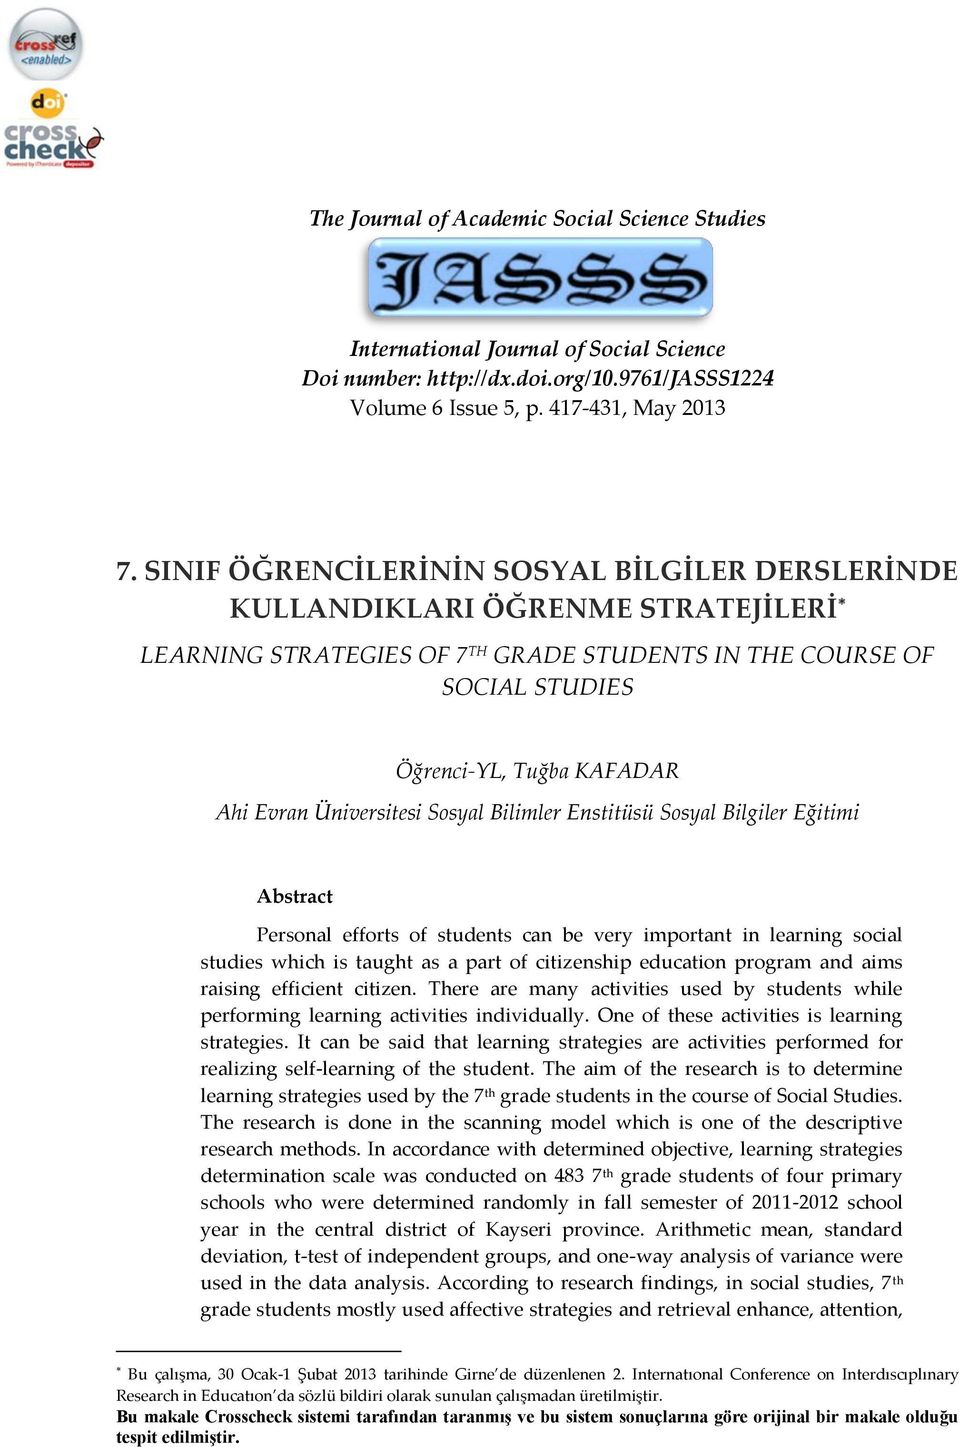 Üniversitesi Sosyal Bilimler Enstitüsü Sosyal Bilgiler Eğitimi Abstract Personal efforts of students can be very important in learning social studies which is taught as a part of citizenship